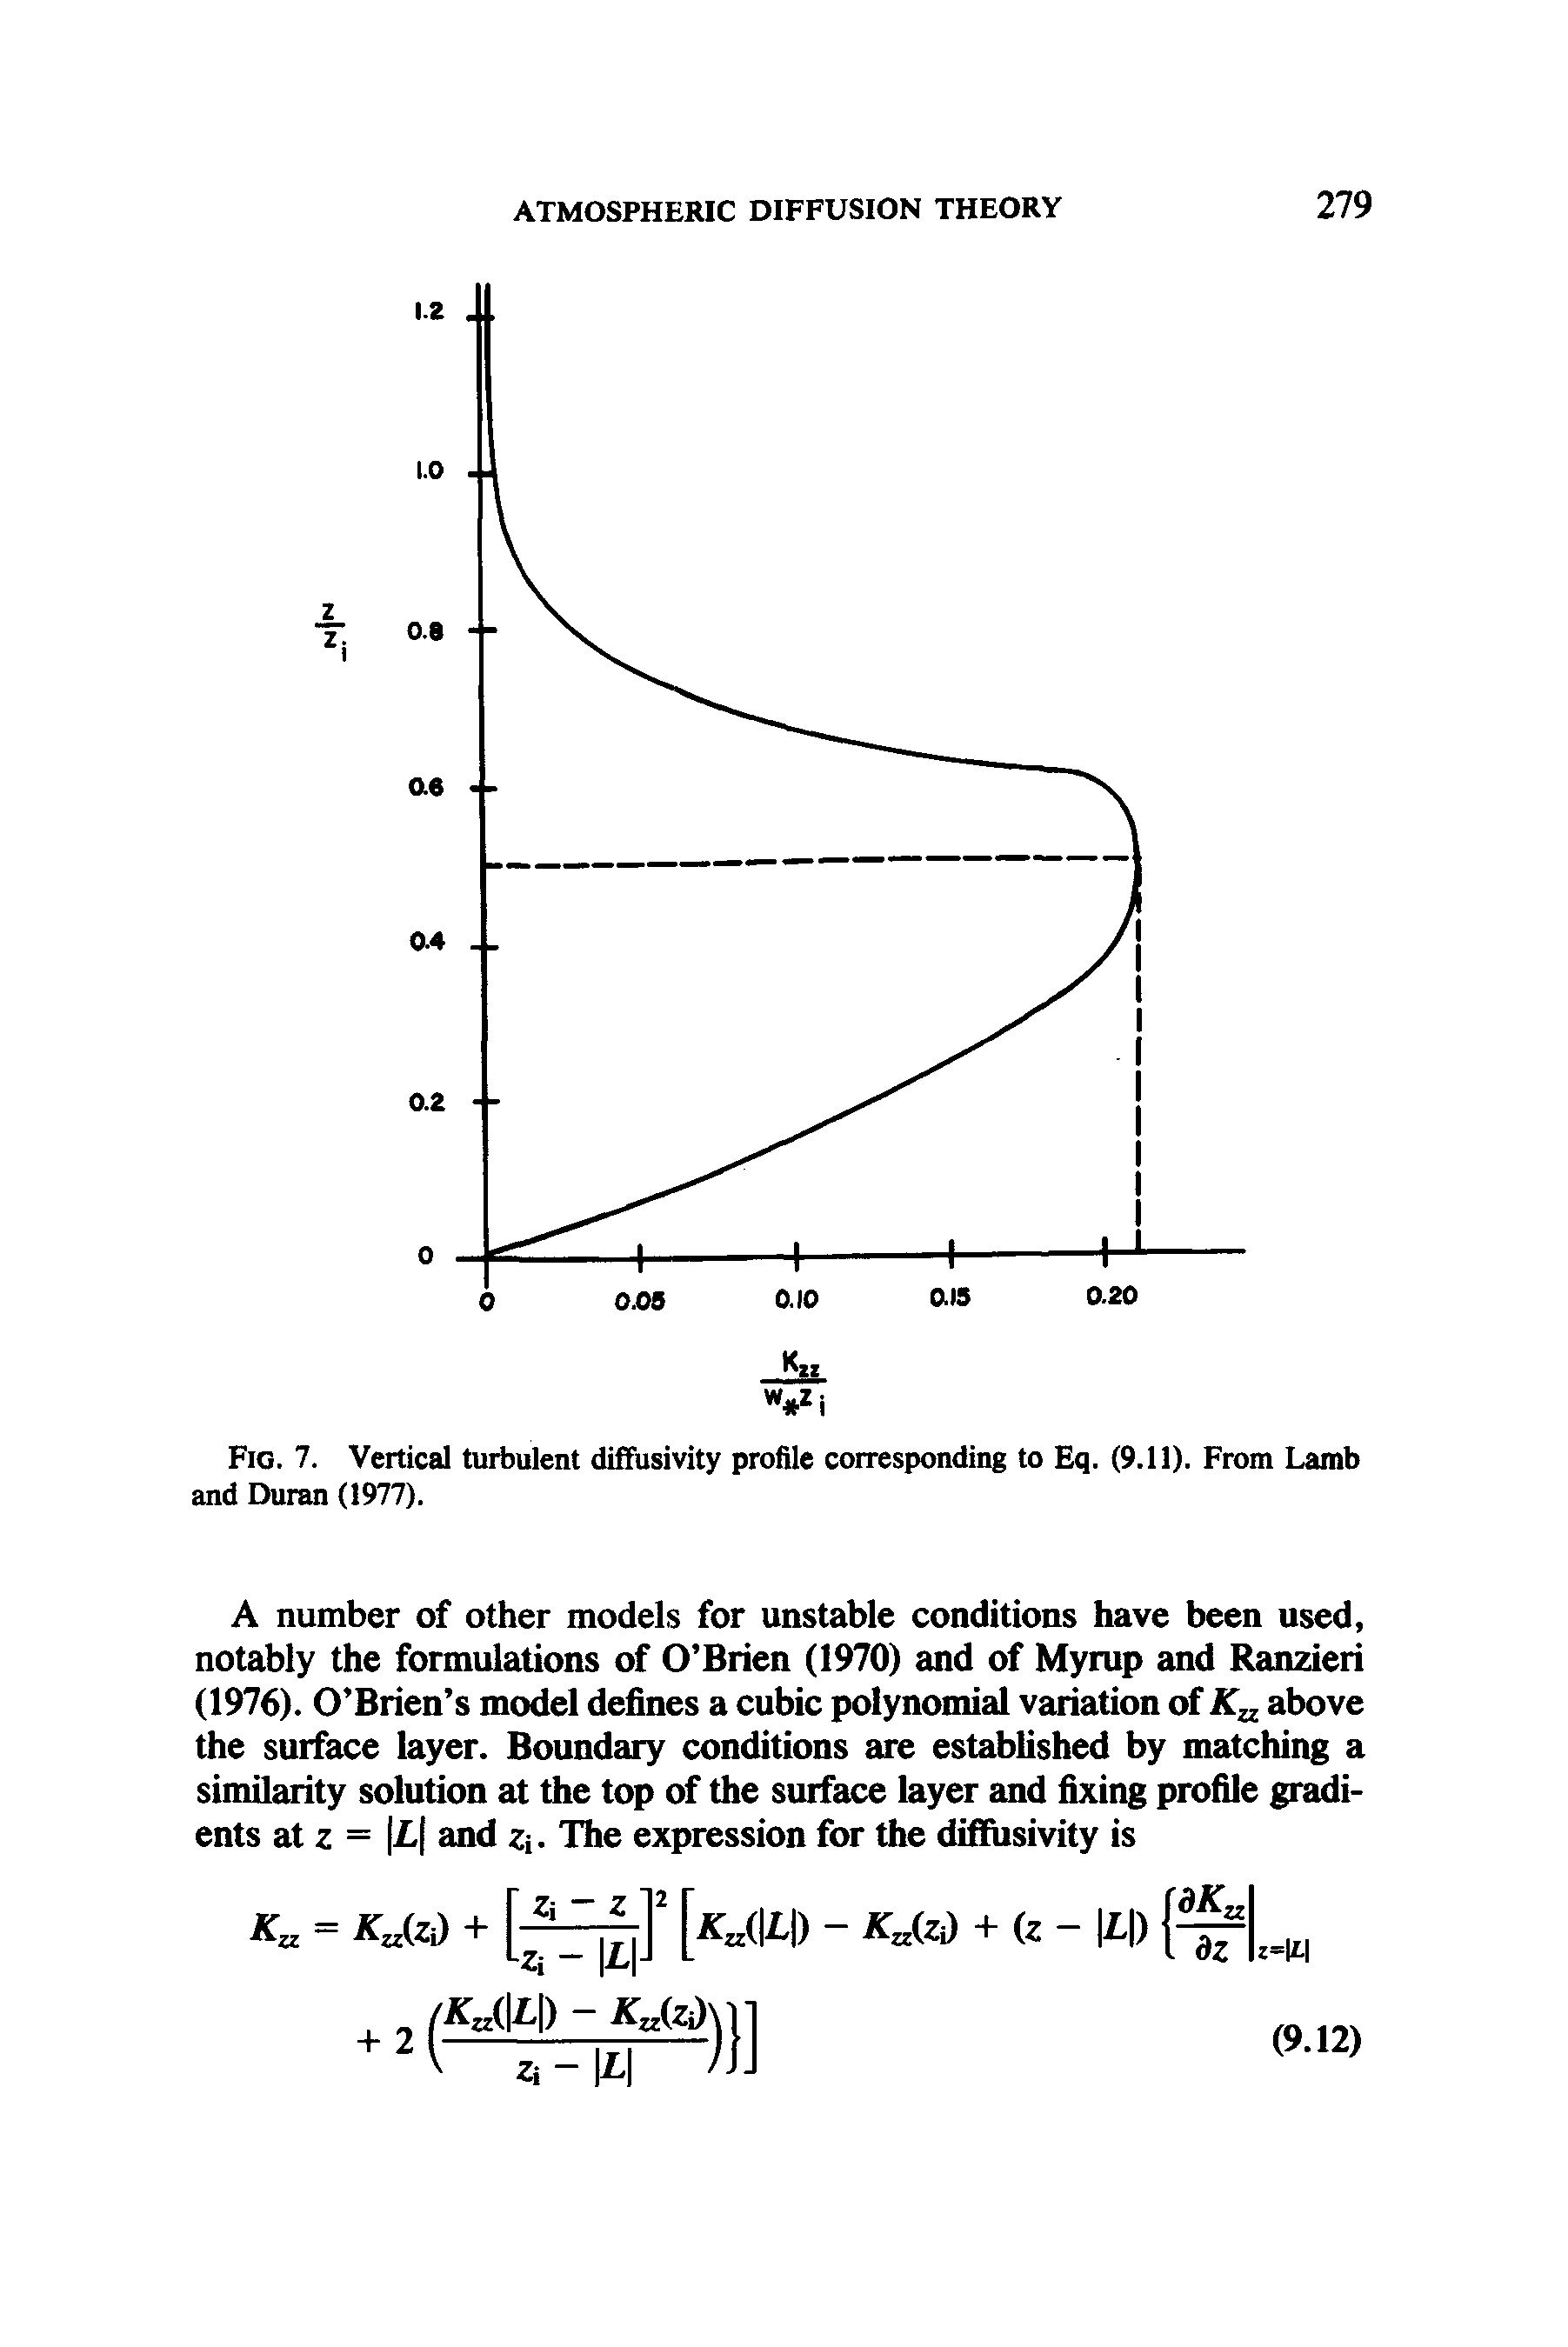 Fig. 7. Vertical turbulent diffusivity profile corresponding to Eq. (9.11). From Lamb and Duran (1977).